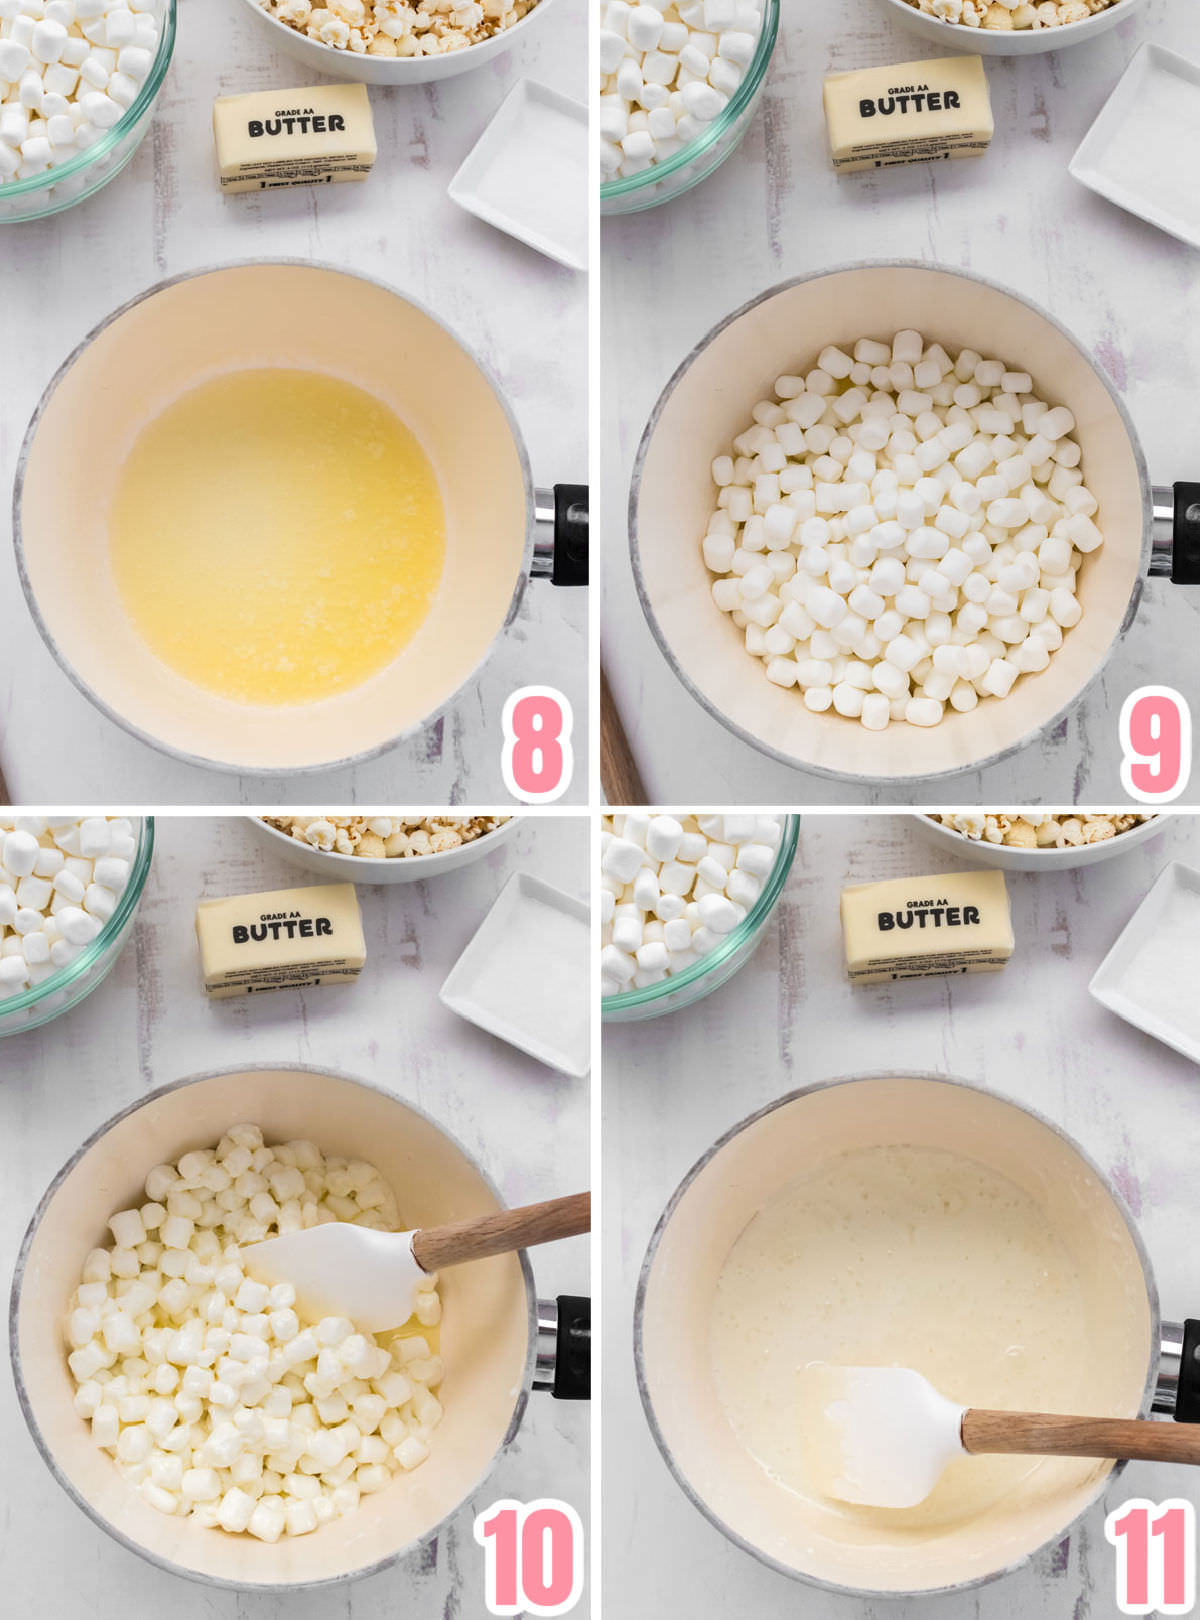 Collage image showing the steps necessary to make the marshmallow mixture for the popcorn.